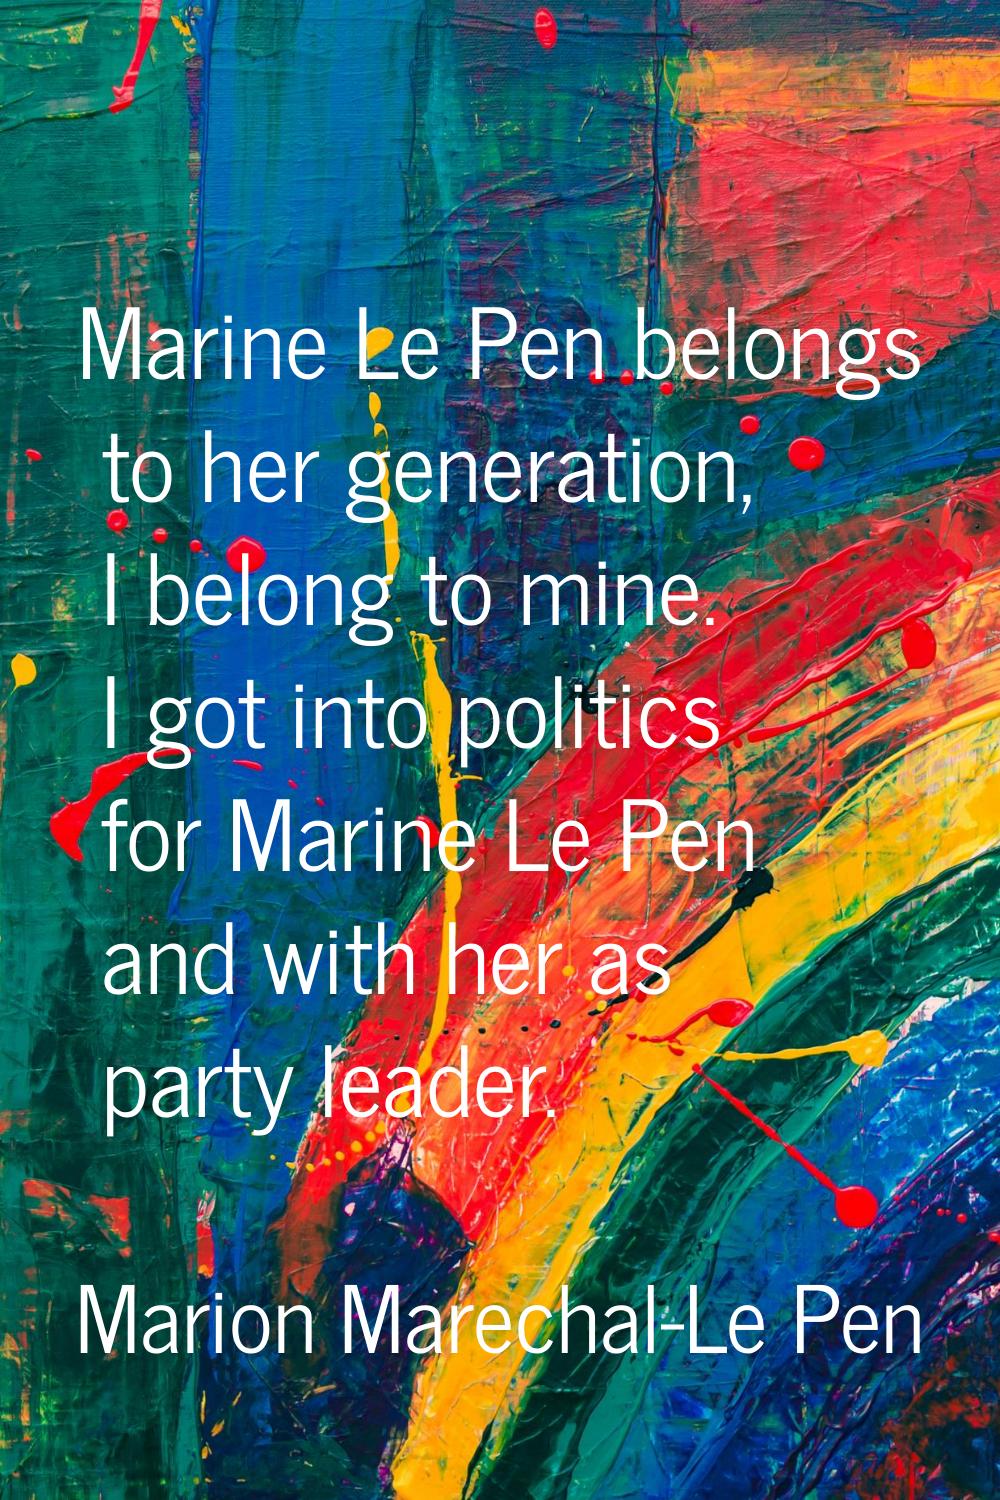 Marine Le Pen belongs to her generation, I belong to mine. I got into politics for Marine Le Pen an